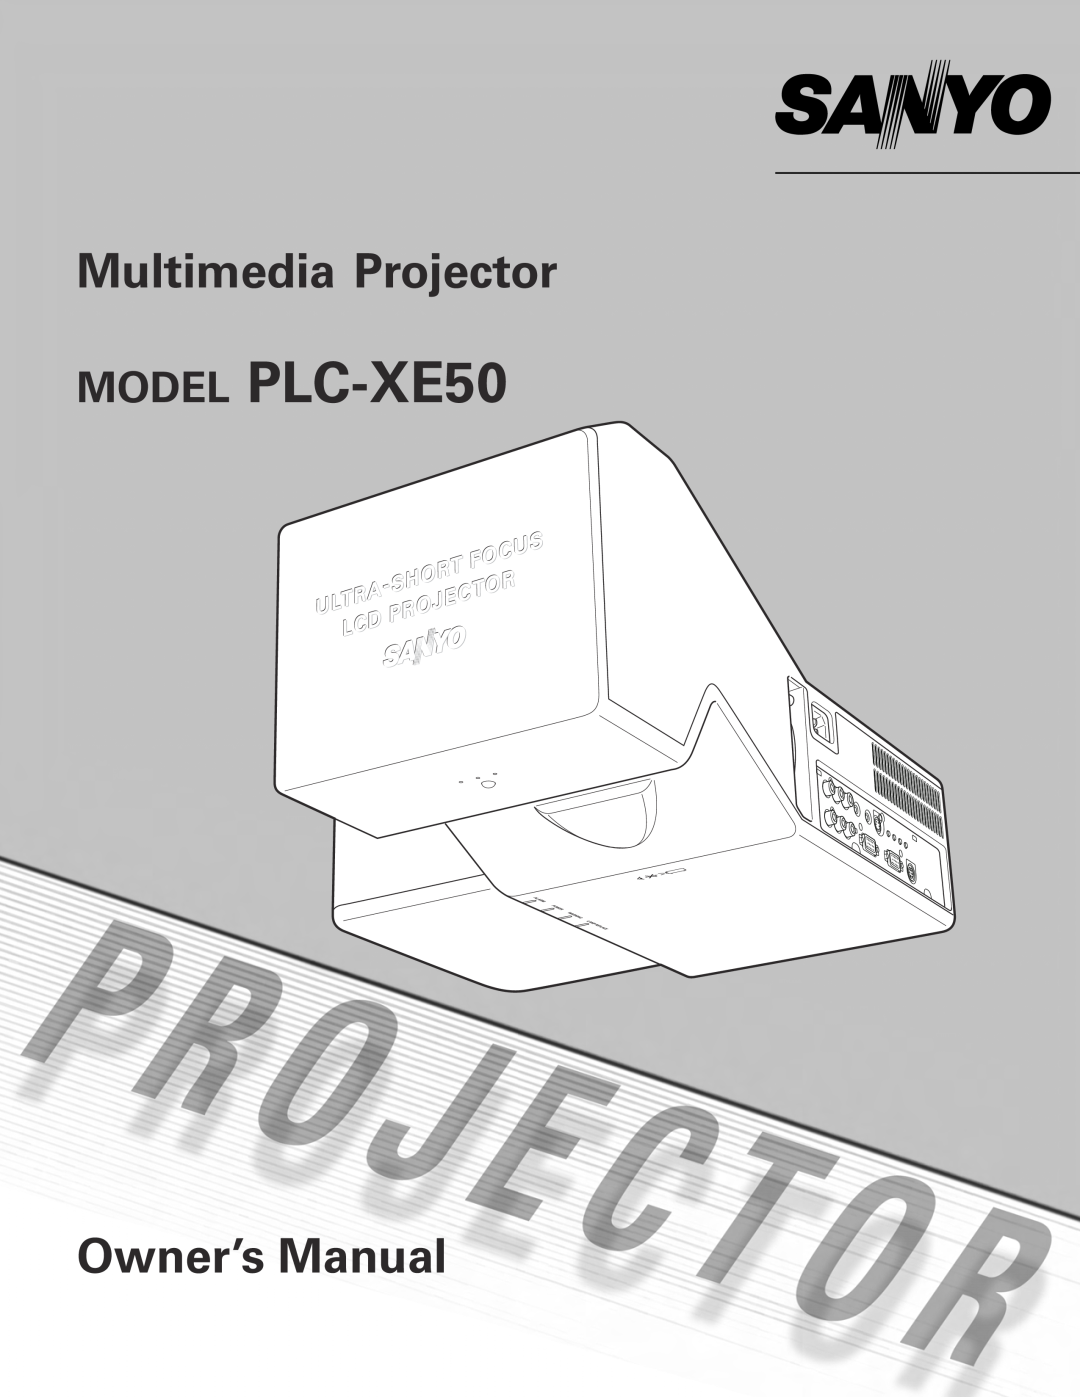 Sanyo owner manual MODEL PLC-XE50, Multimedia Projector, Owner’s Manual 